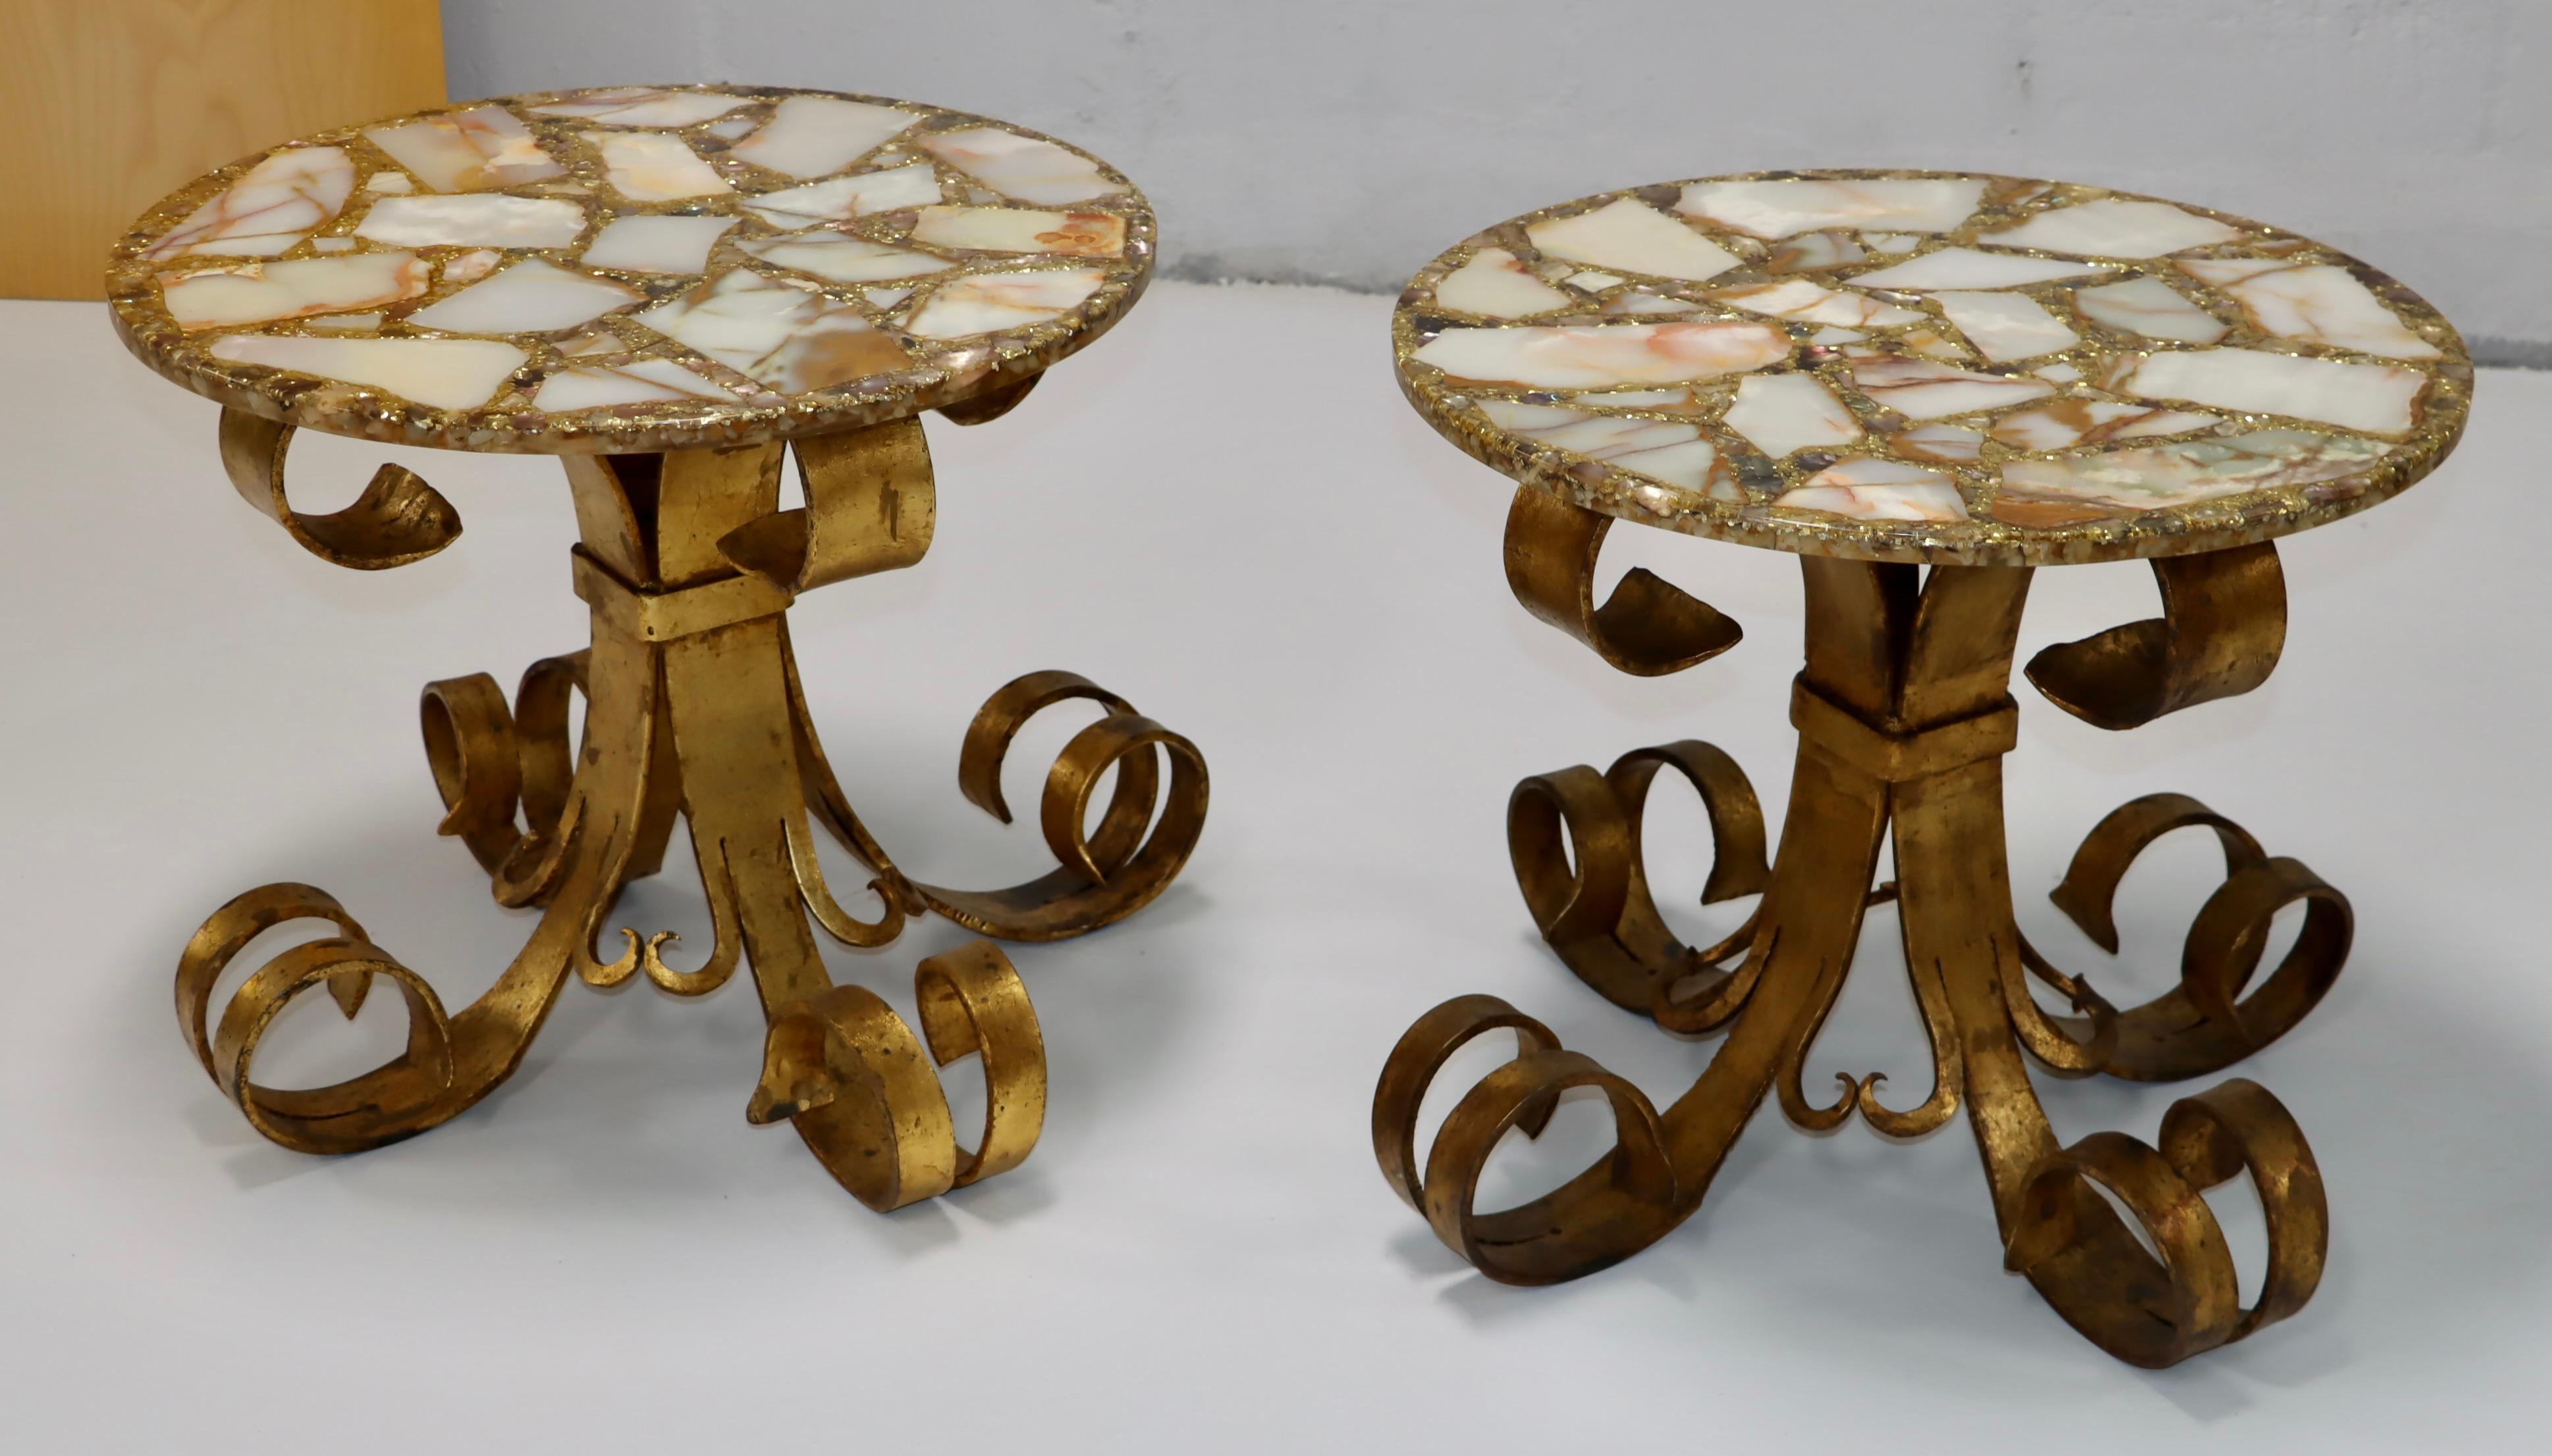 1950s solid iron torch cut brutalist style scrolled side tables with gilt finish and onyx and resin tops, in vintage original condition with some wear and patina to the gilt finish due to age and use.